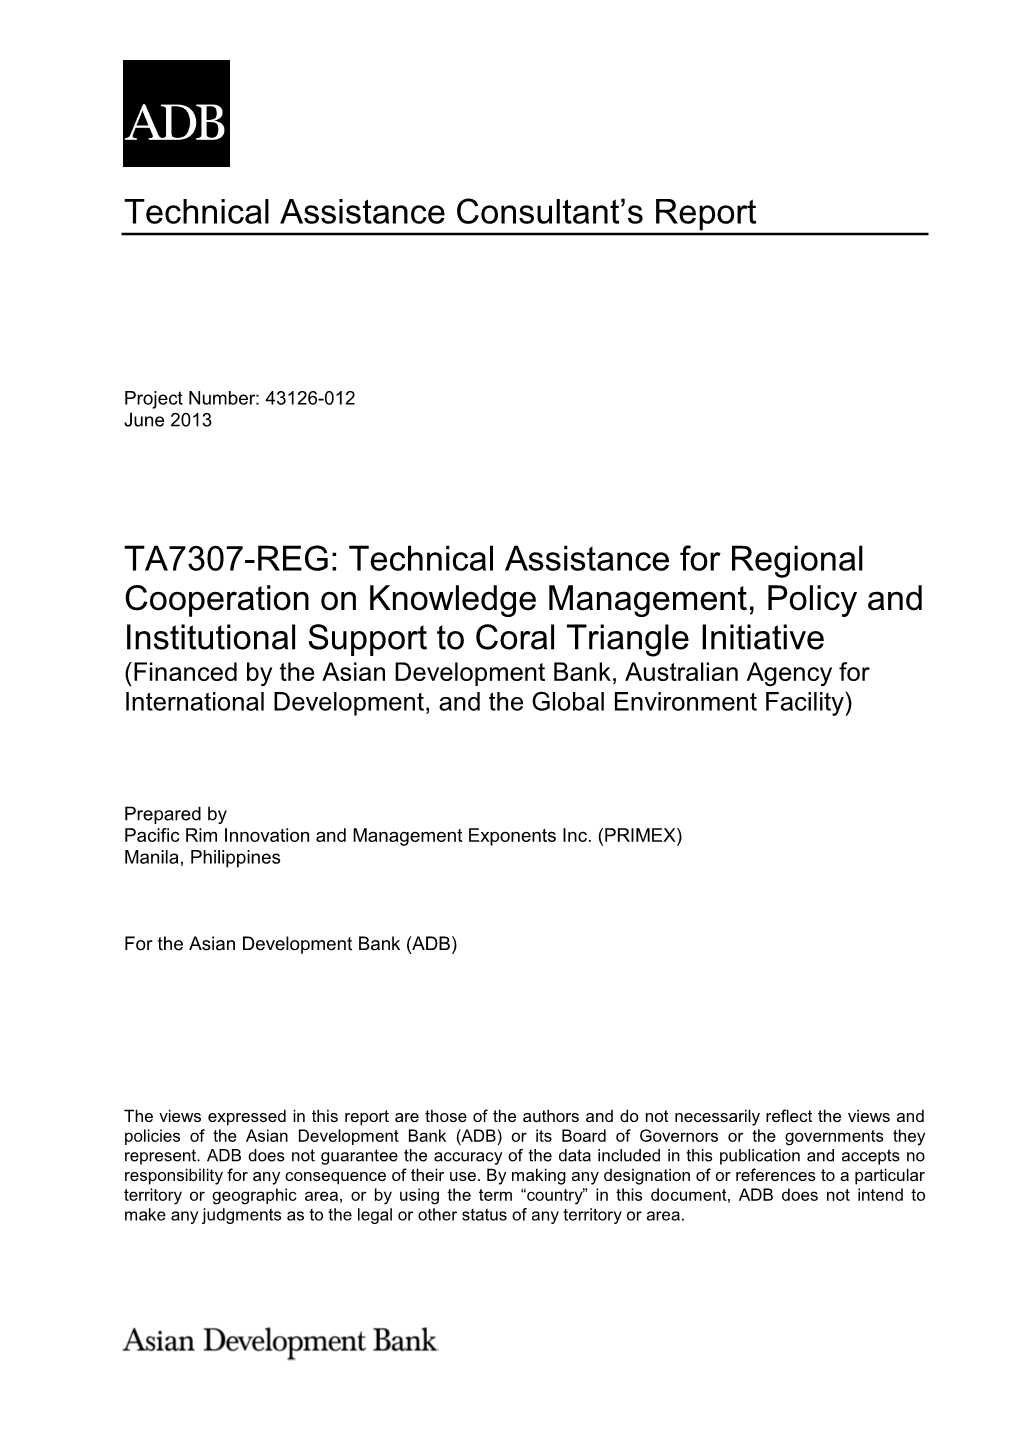 Technical Assistance Consultant's Report TA7307-REG